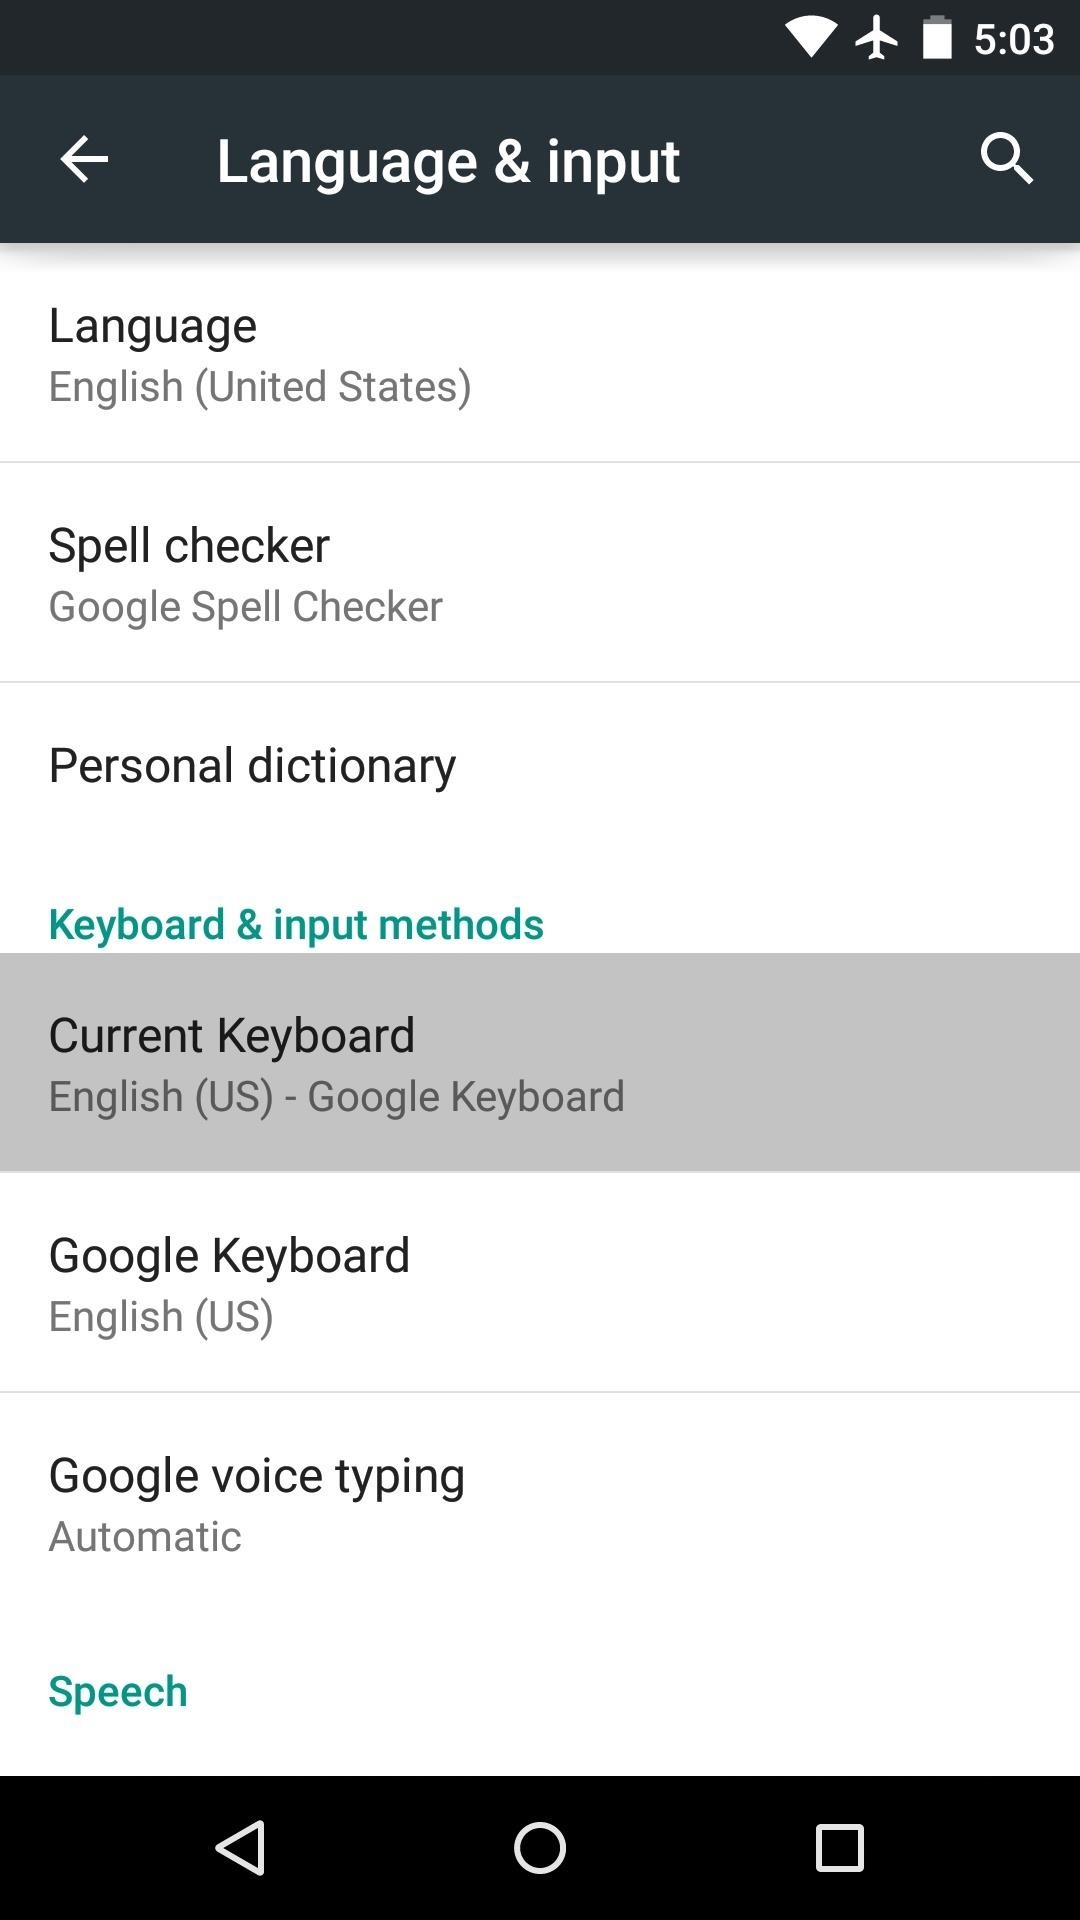 Get Sony's New Xperia Z3 Keyboard on Almost Any Android Device